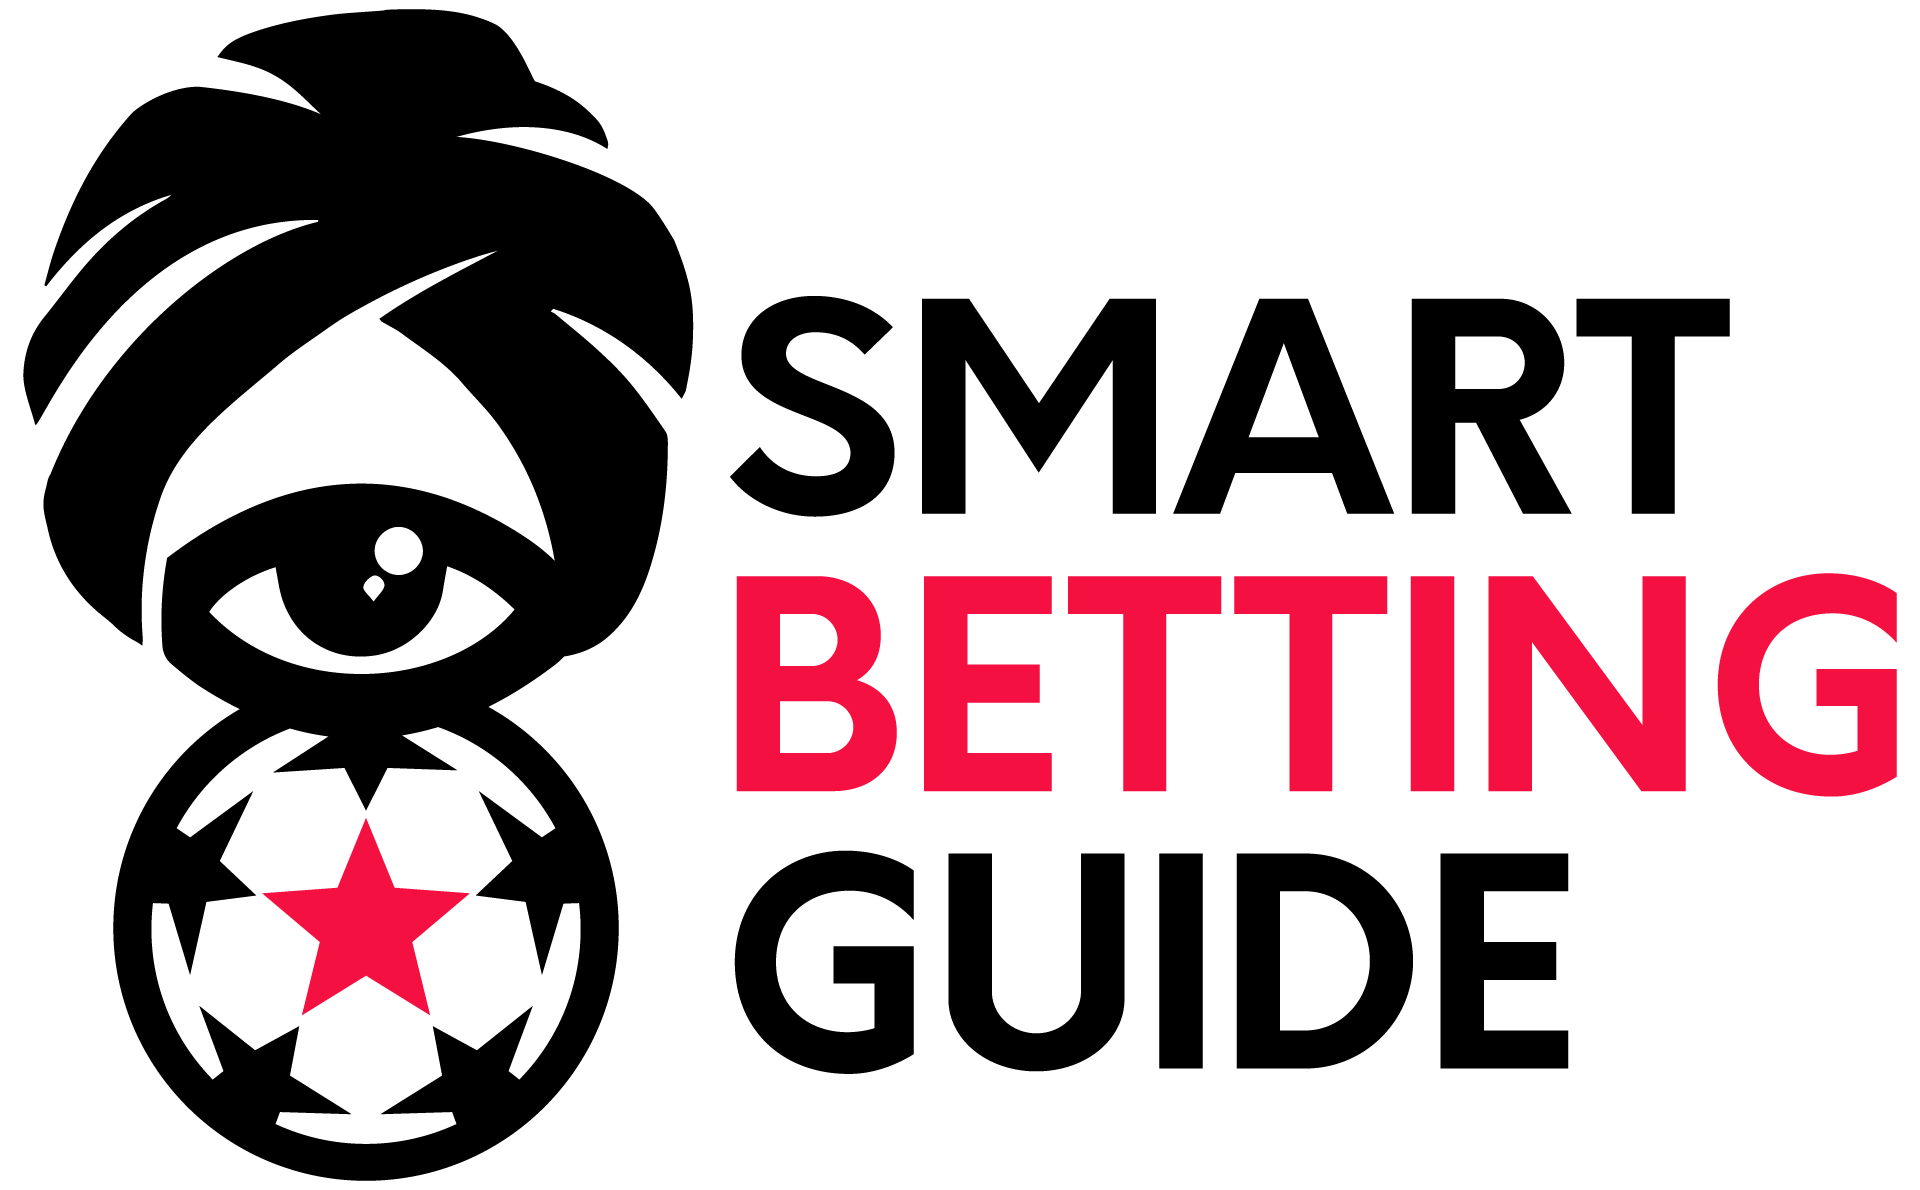 Smart Betting Guide